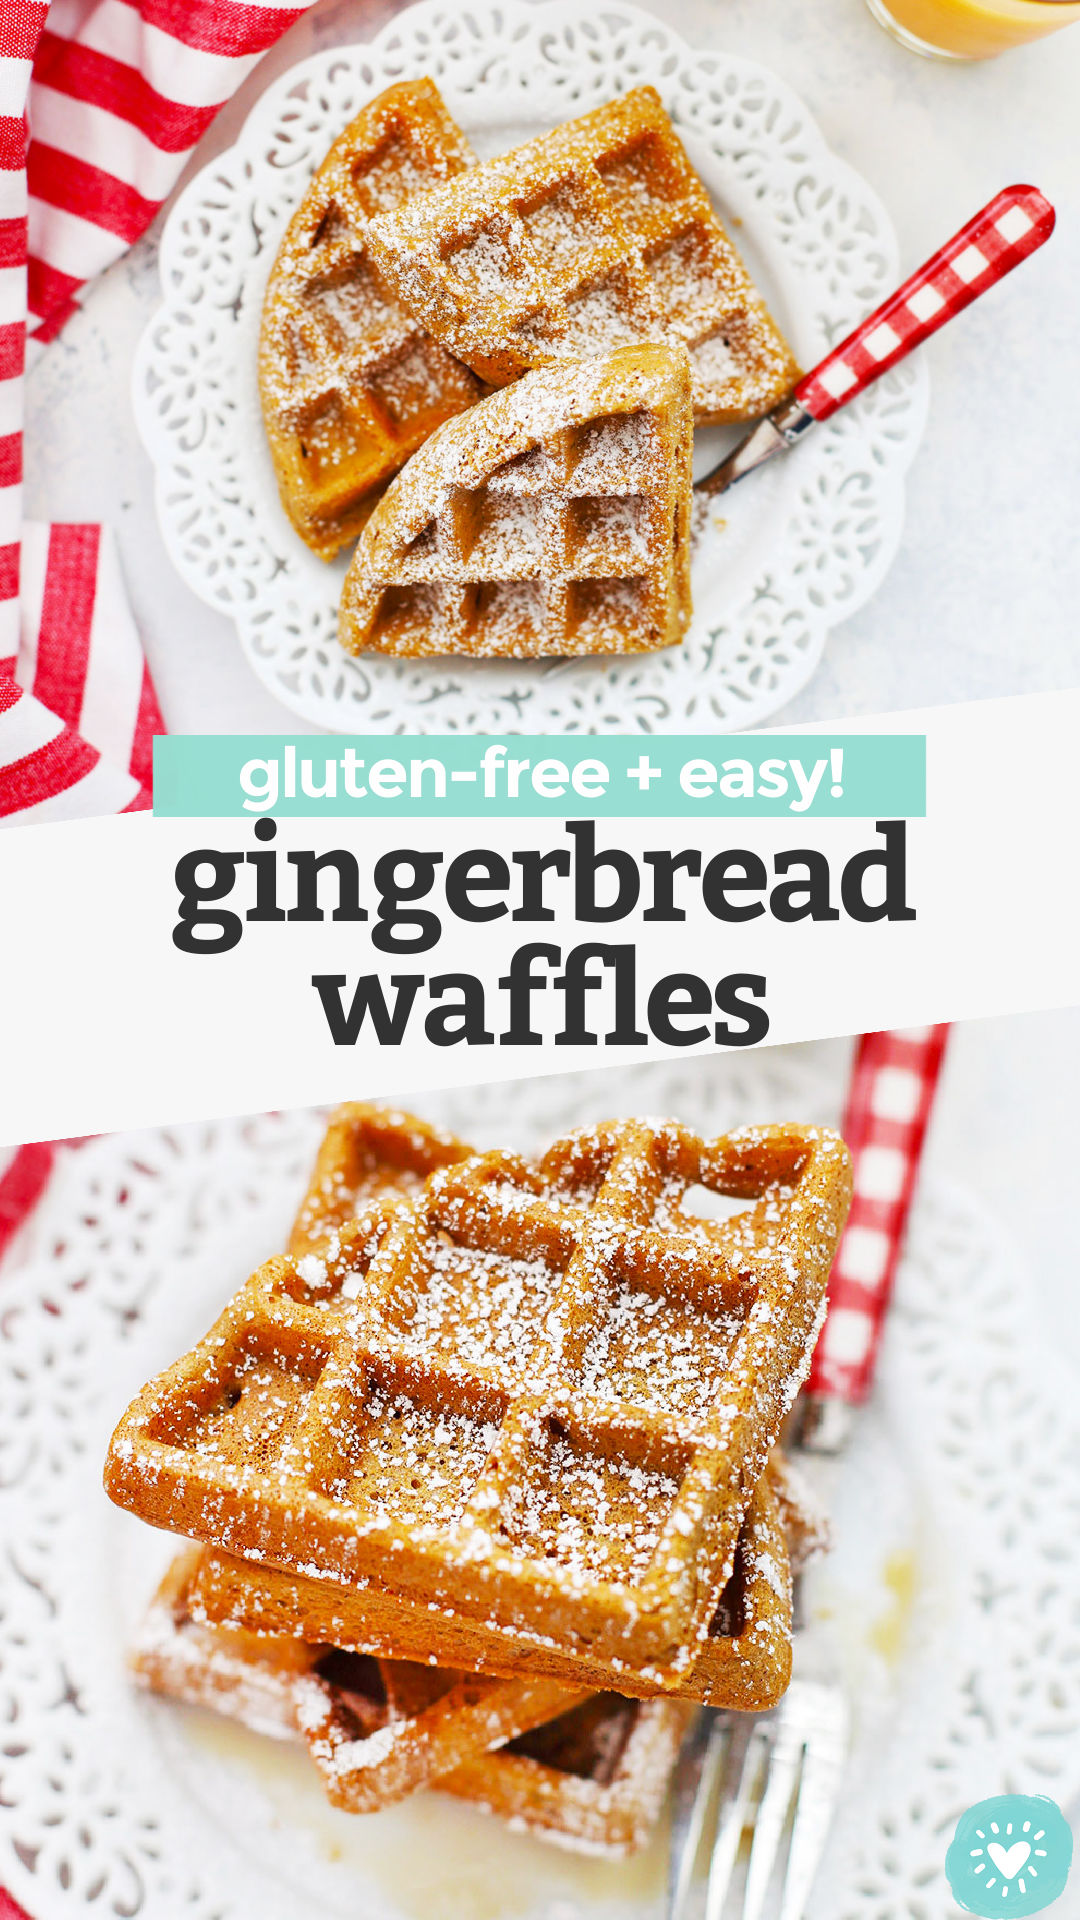 Gluten Free Gingerbread Waffles - crispy exterior, fluffy interior, and perfectly spiced. The perfect holiday breakfast! (Gluten free, dairy free)// gluten free Holiday breakfast // gluten free Christmas breakfast // gluten free waffles recipe // #waffles #gingebread #glutenfree #brunch #breakfast